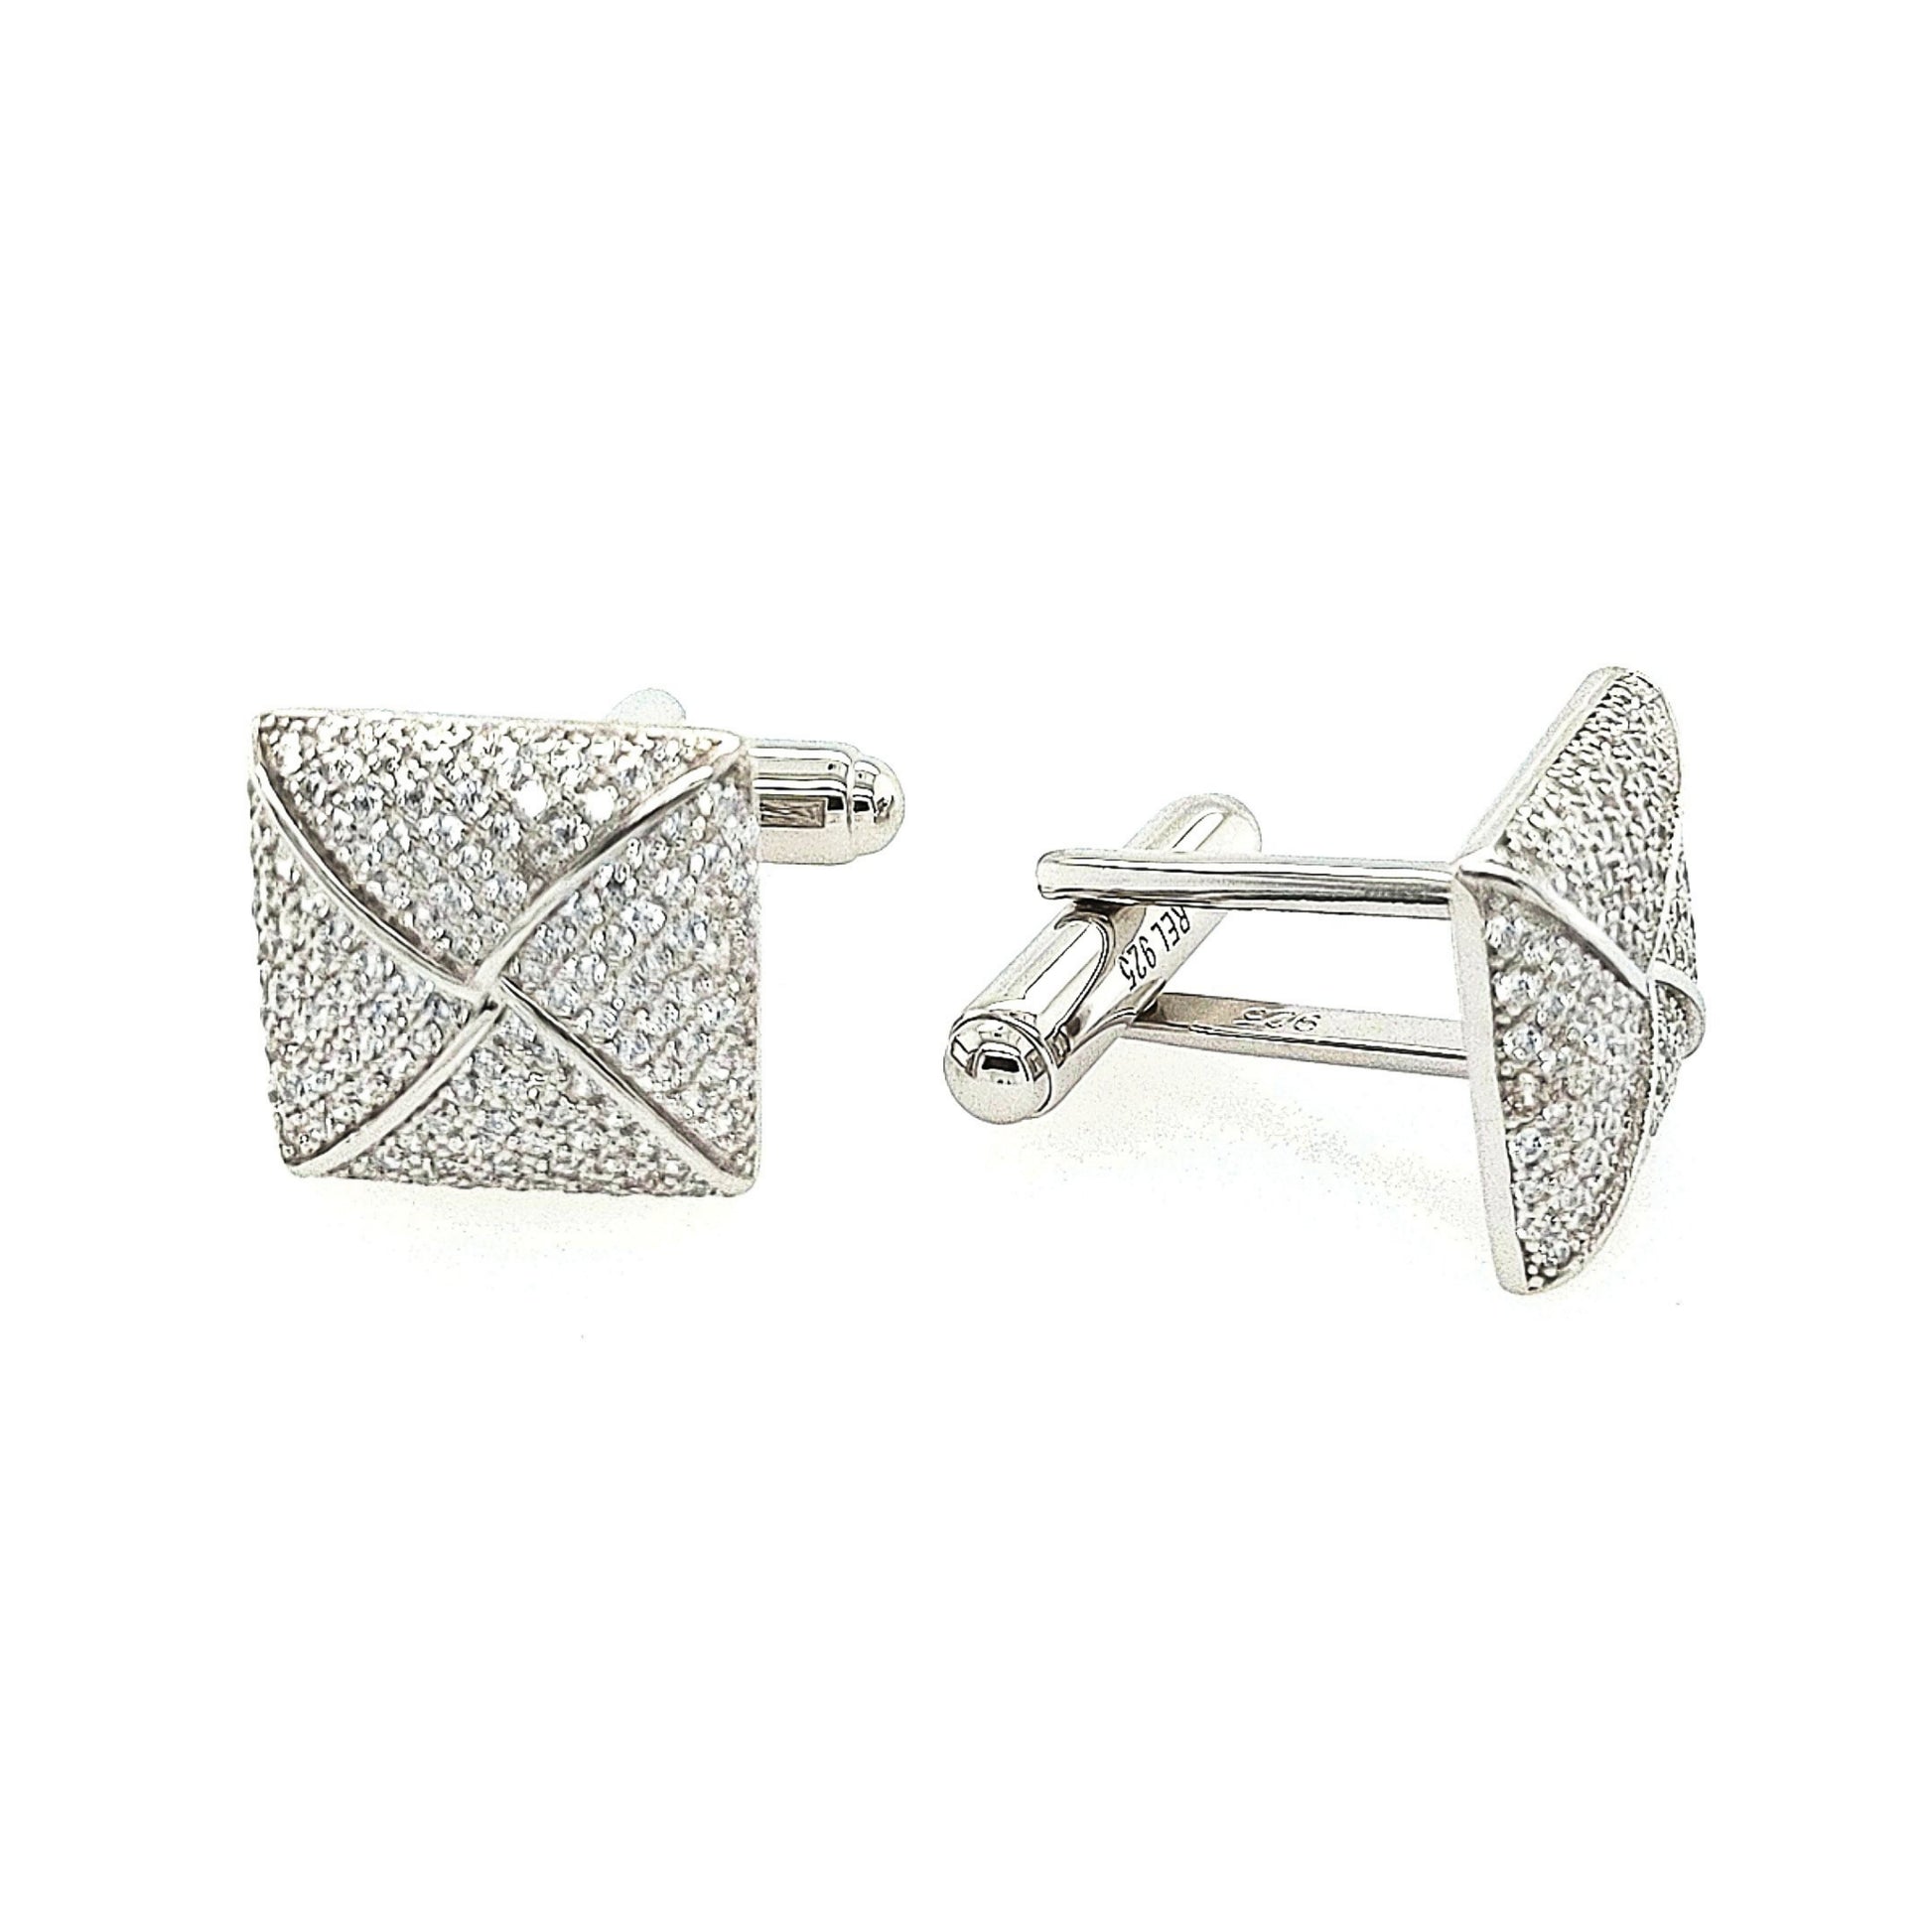 Sterling Silver Micropave Square With Swirl Cufflinks - HK Jewels